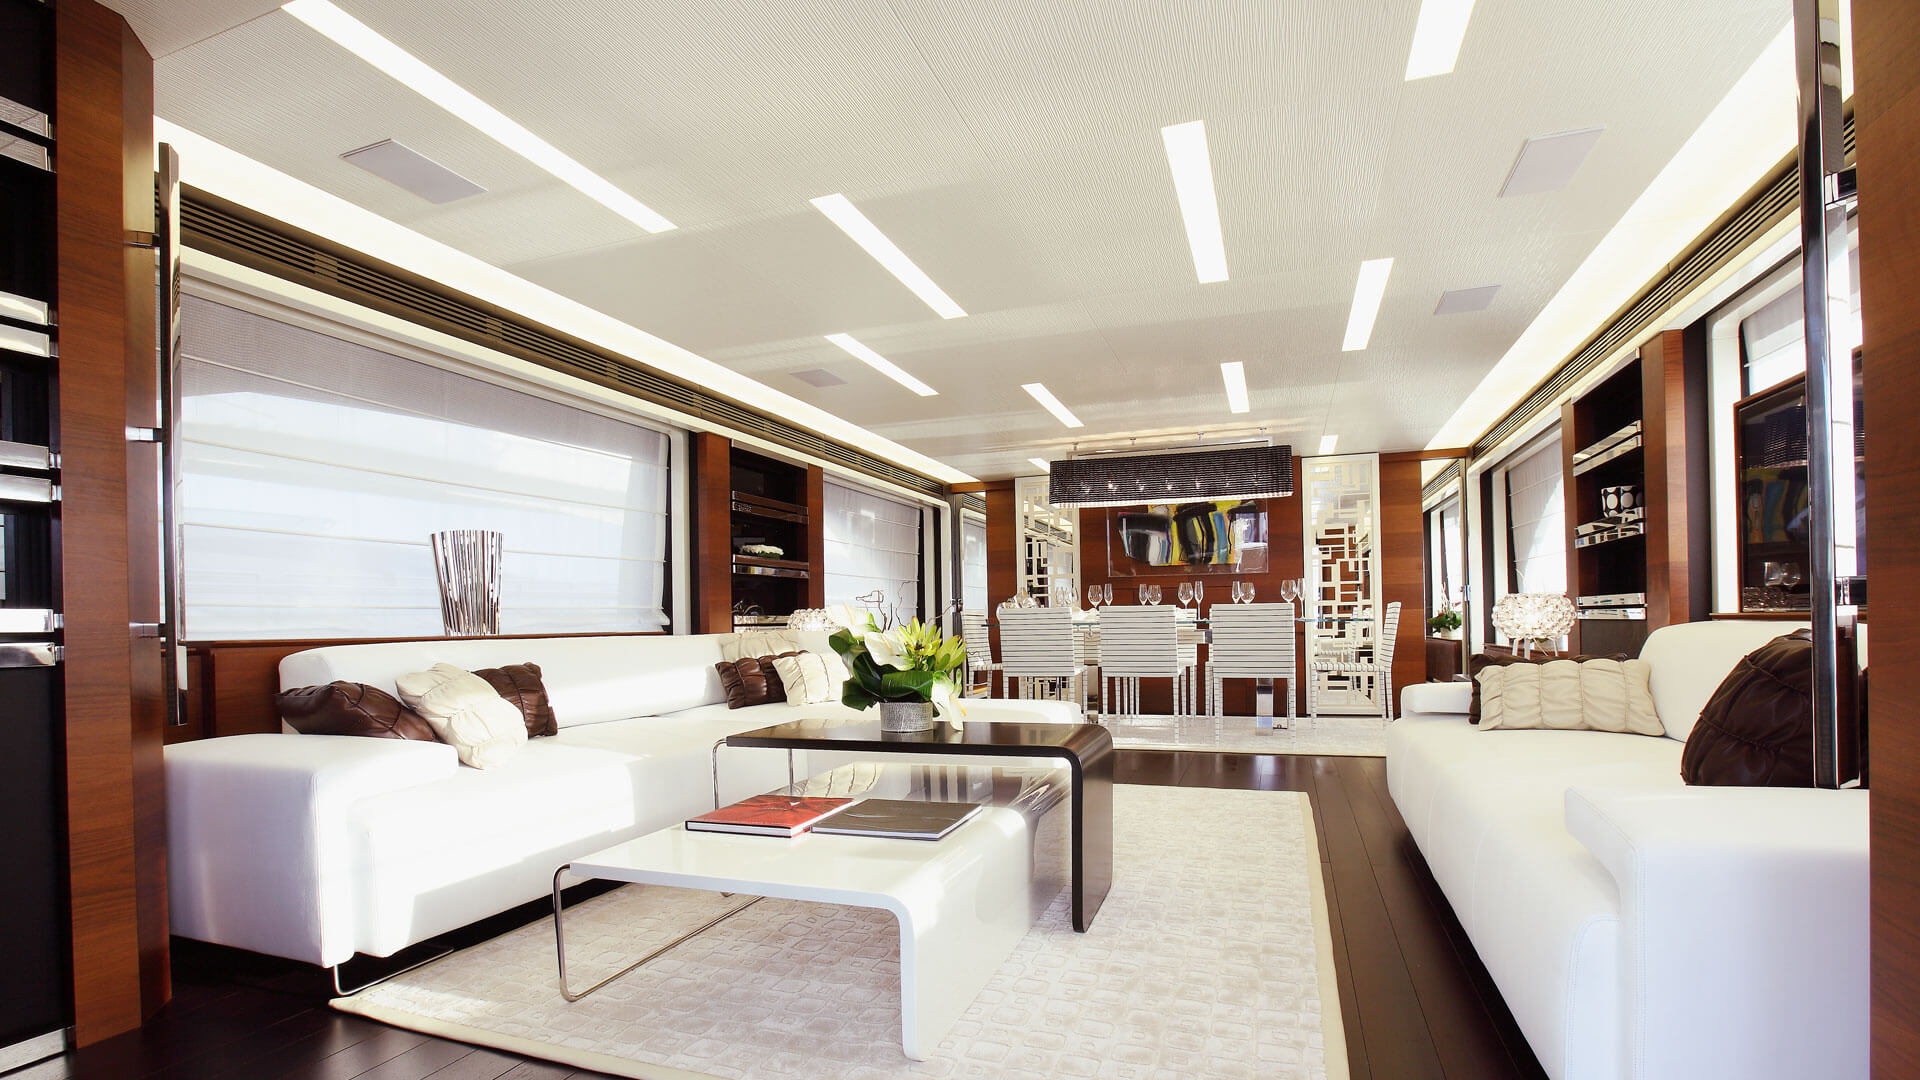 Integrated ceiling panels